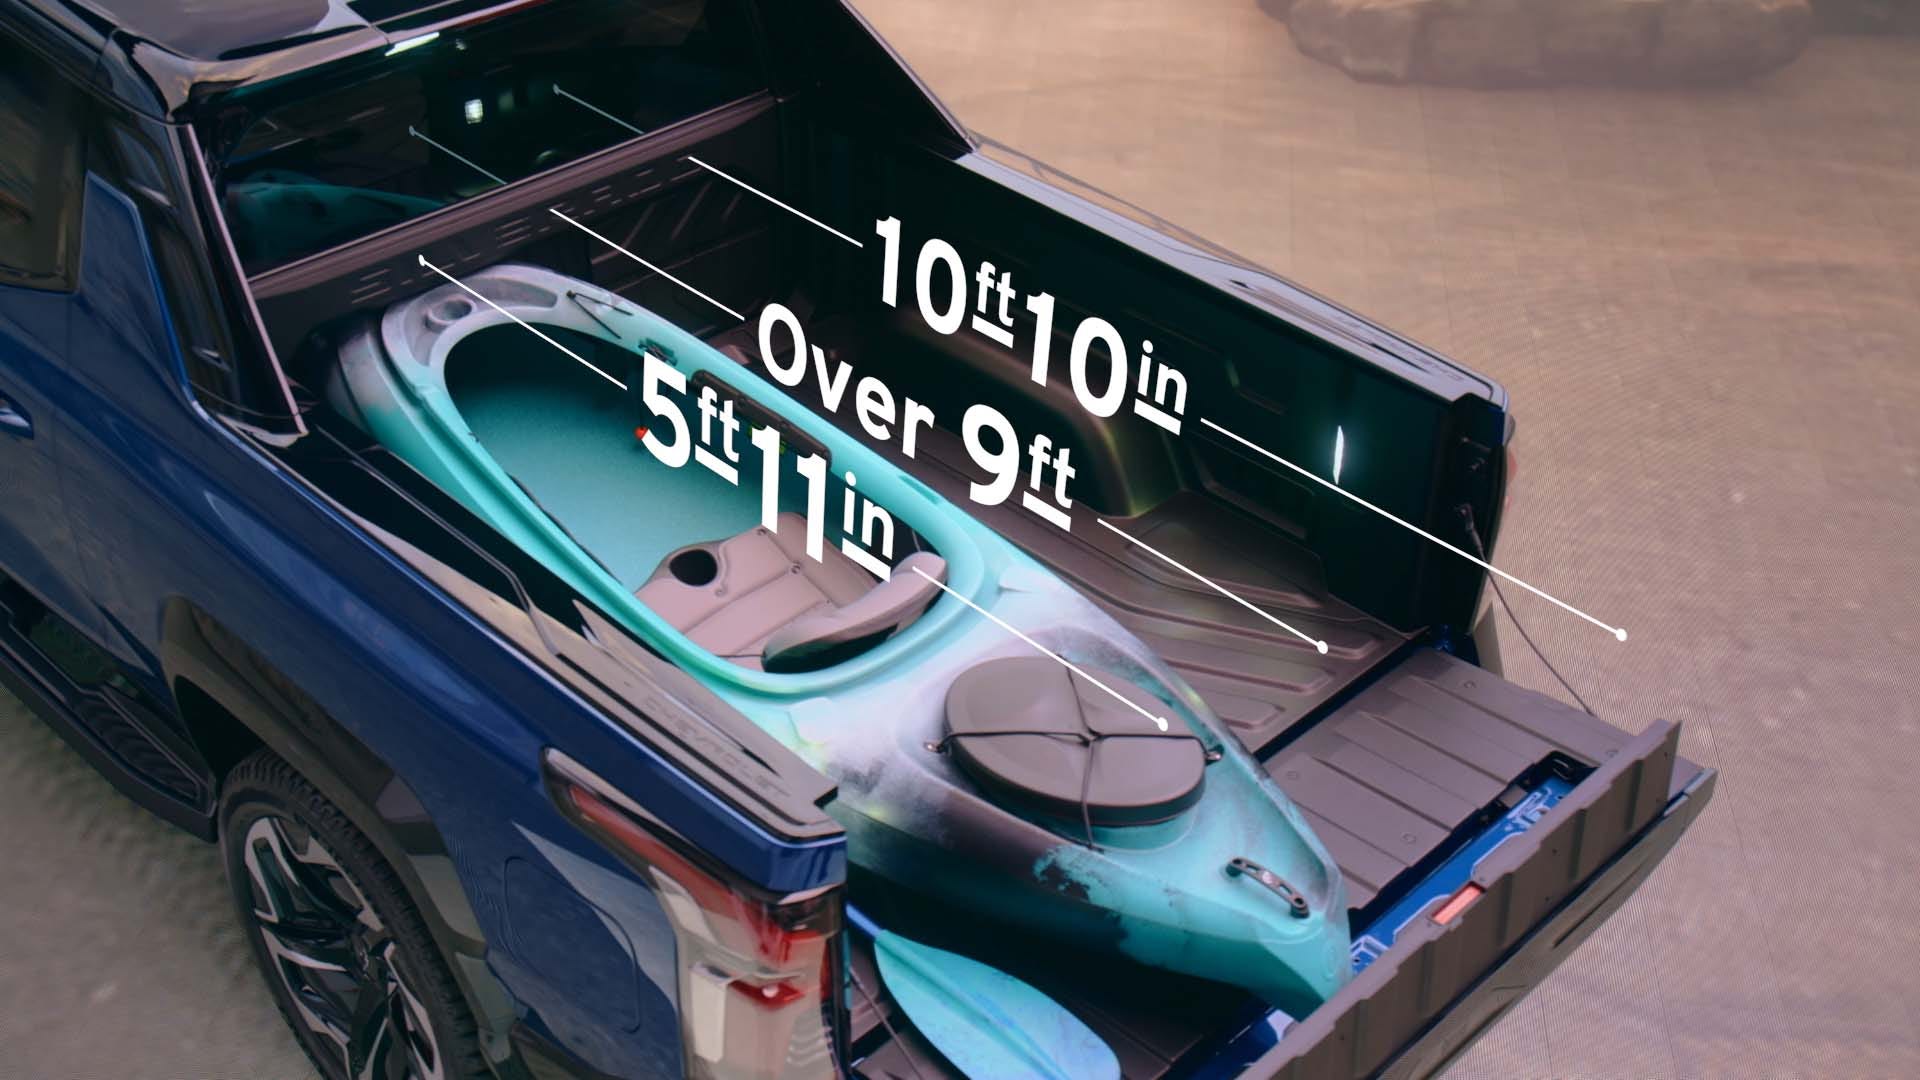 The 2024 Chevrolet Silverado EV RST comes with a Multi-Flex Midgate that extends the 5'11' bed to 9 feet when dropped - 10' 10" with the Multi-FLex Tailgate down.